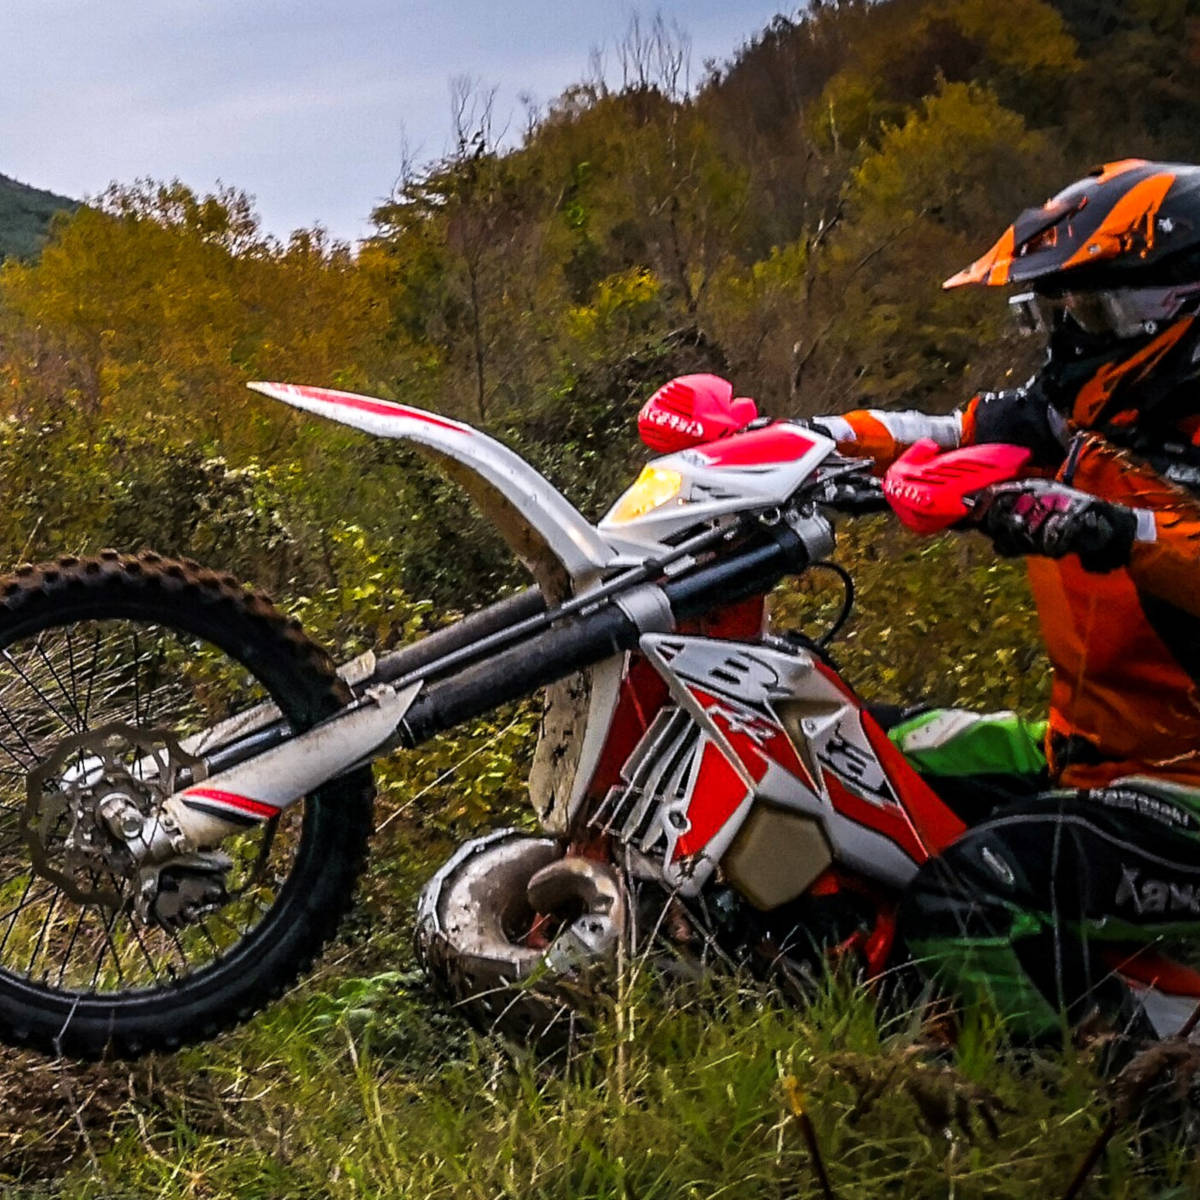 Image linking to the Offroad Bike Services page for details of  and the  on offer there: Preparation, servicing and repair for all off-road motorcycles, whether 2 stroke or 4 stroke.  Servicing, repairs and tuning.